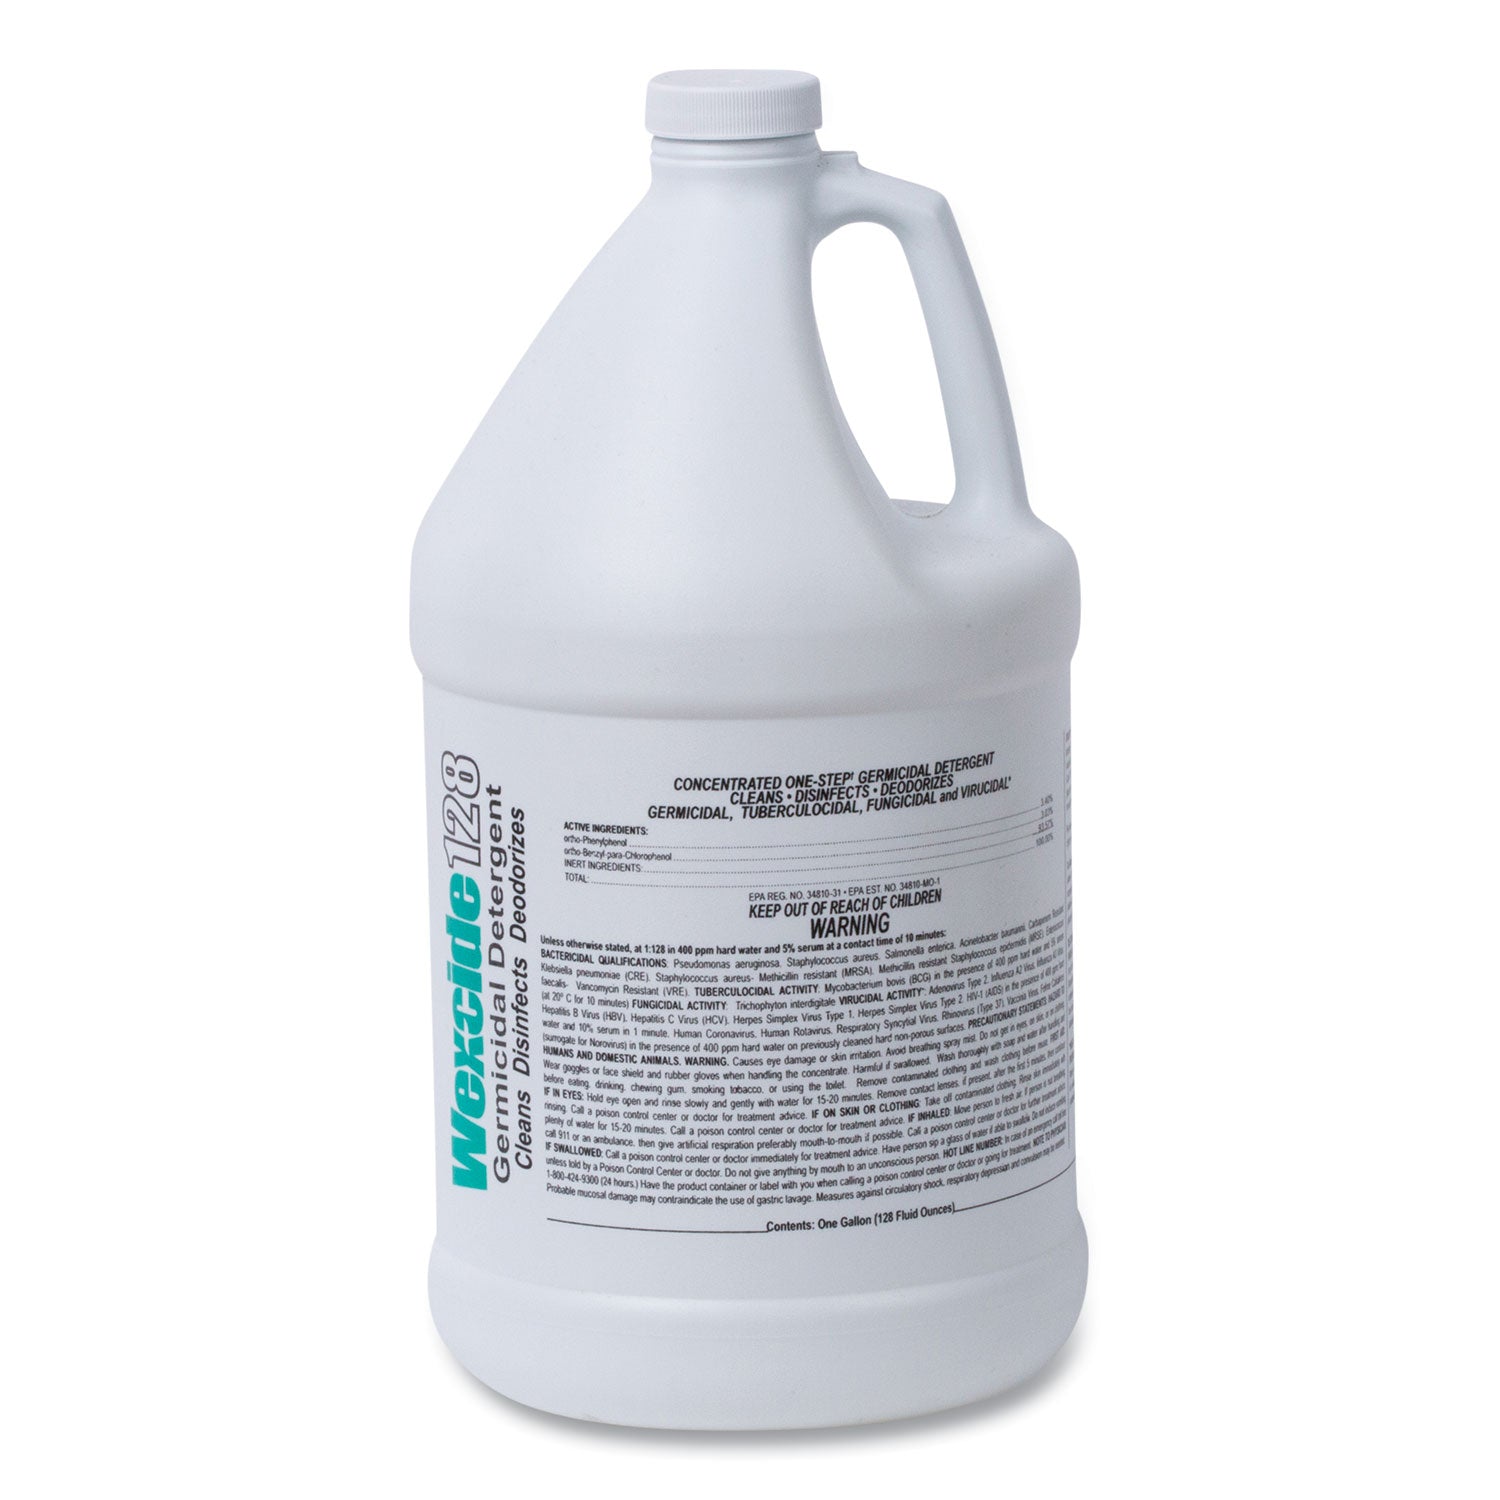 wex-cide-concentrated-disinfecting-cleaner-nectar-scent-128-oz-bottle-4-carton_wxf211000ct - 1